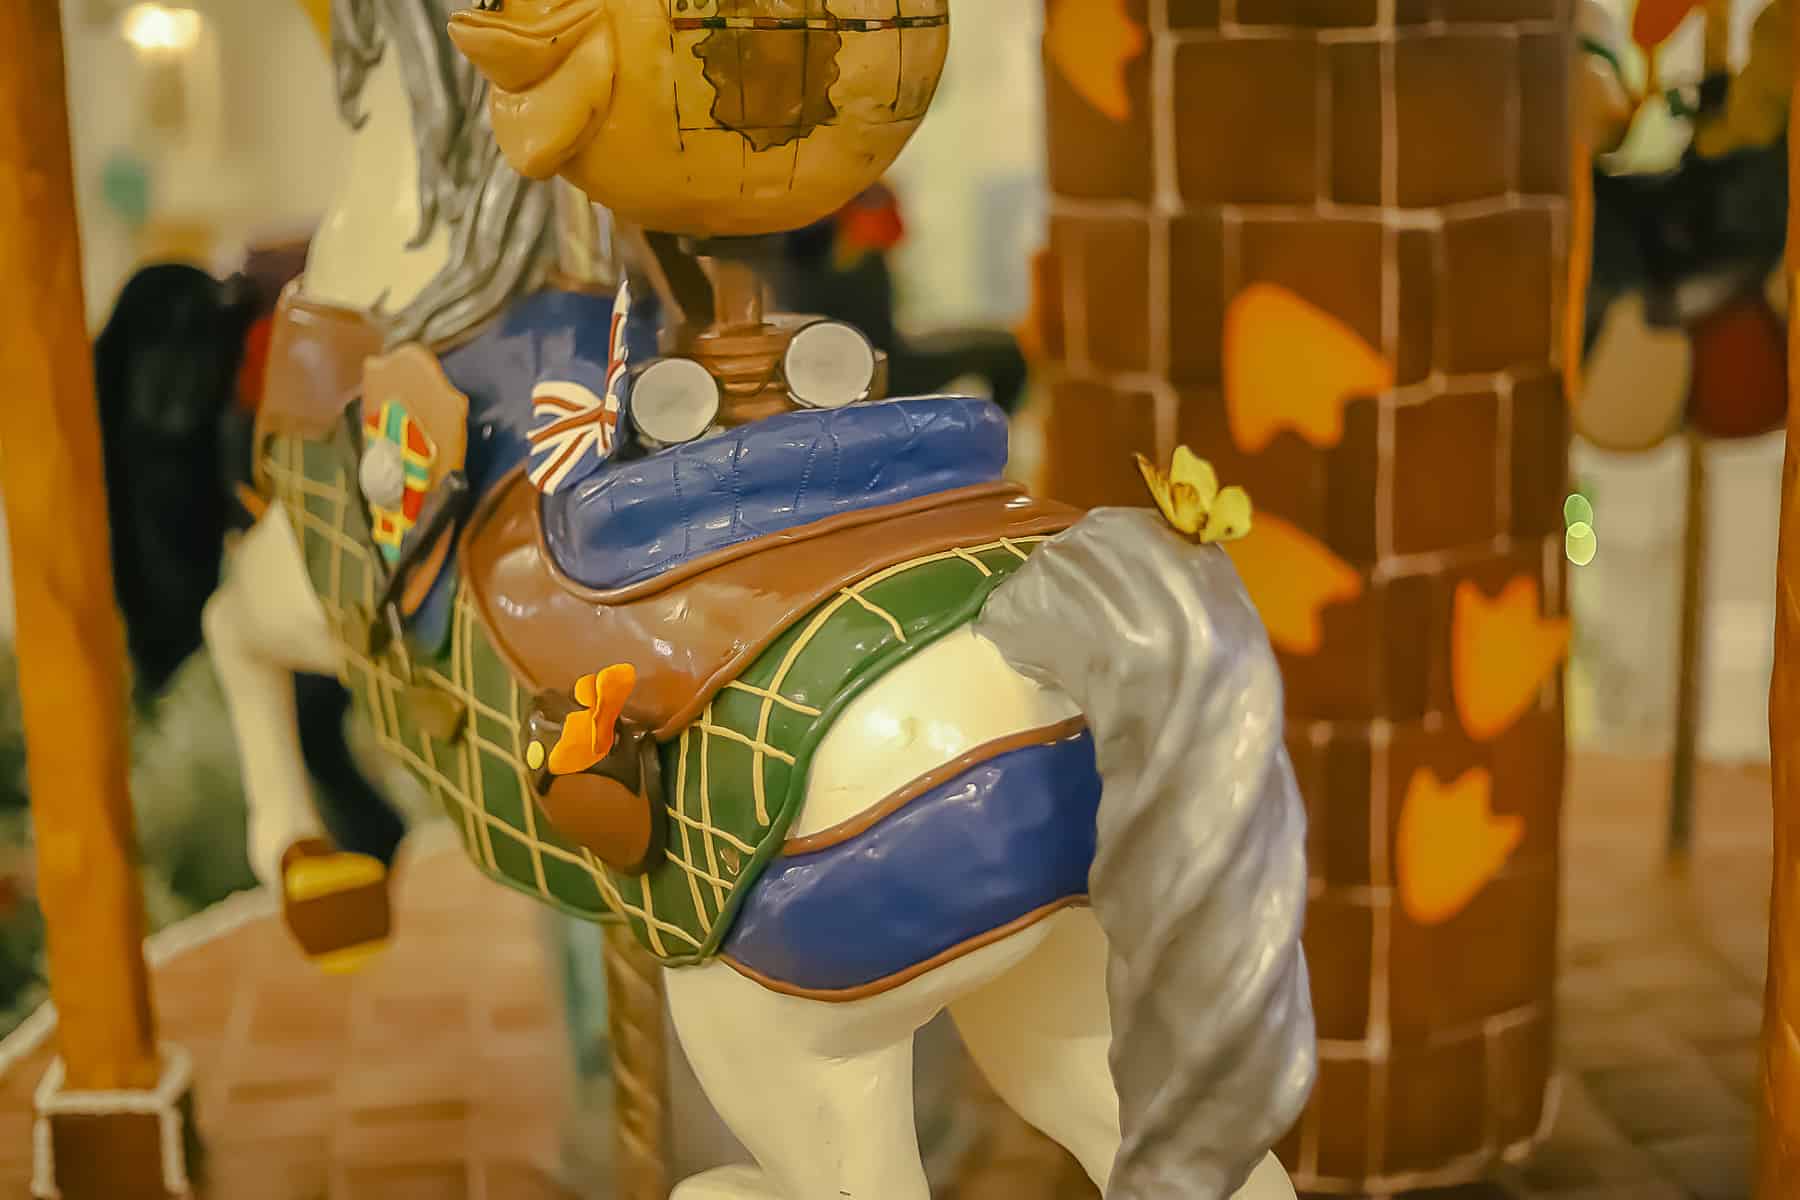 a tail made of chocolate on the carousel pony